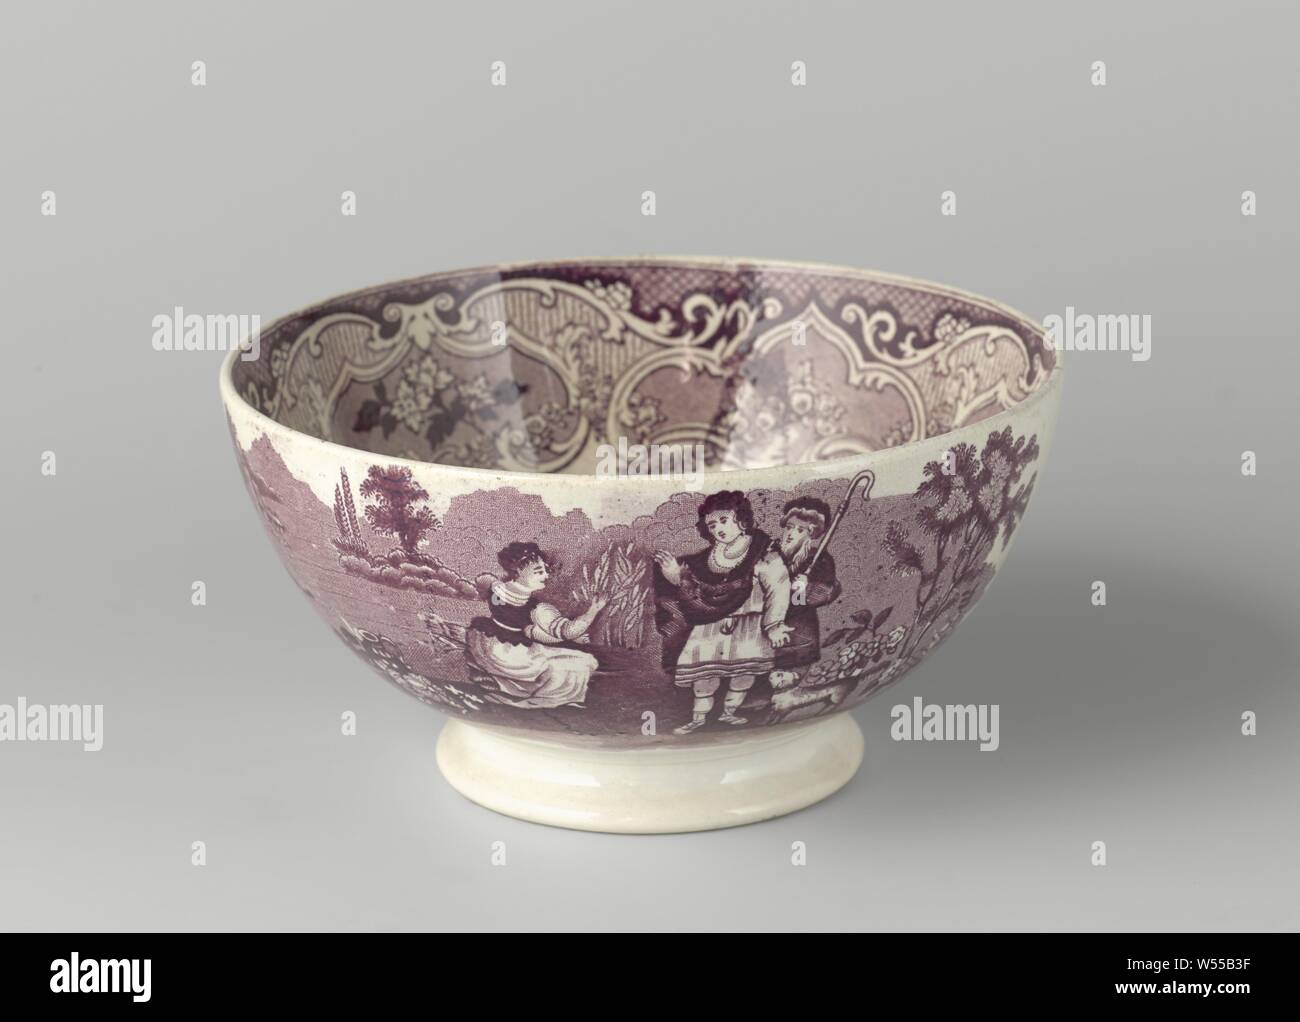 Come on foot with Ruth and Boaz, Bowl of earthenware with purple transfer decor. On the outside of the wall and the bottom of the bowl representations of Ruth and Boaz. The inside of the wall with cartouches with flowers., Petrus Regout, Maastricht, c. 1874, earthenware, h 9.7 cm × d 19.0 cm d 9.8 cm Stock Photo